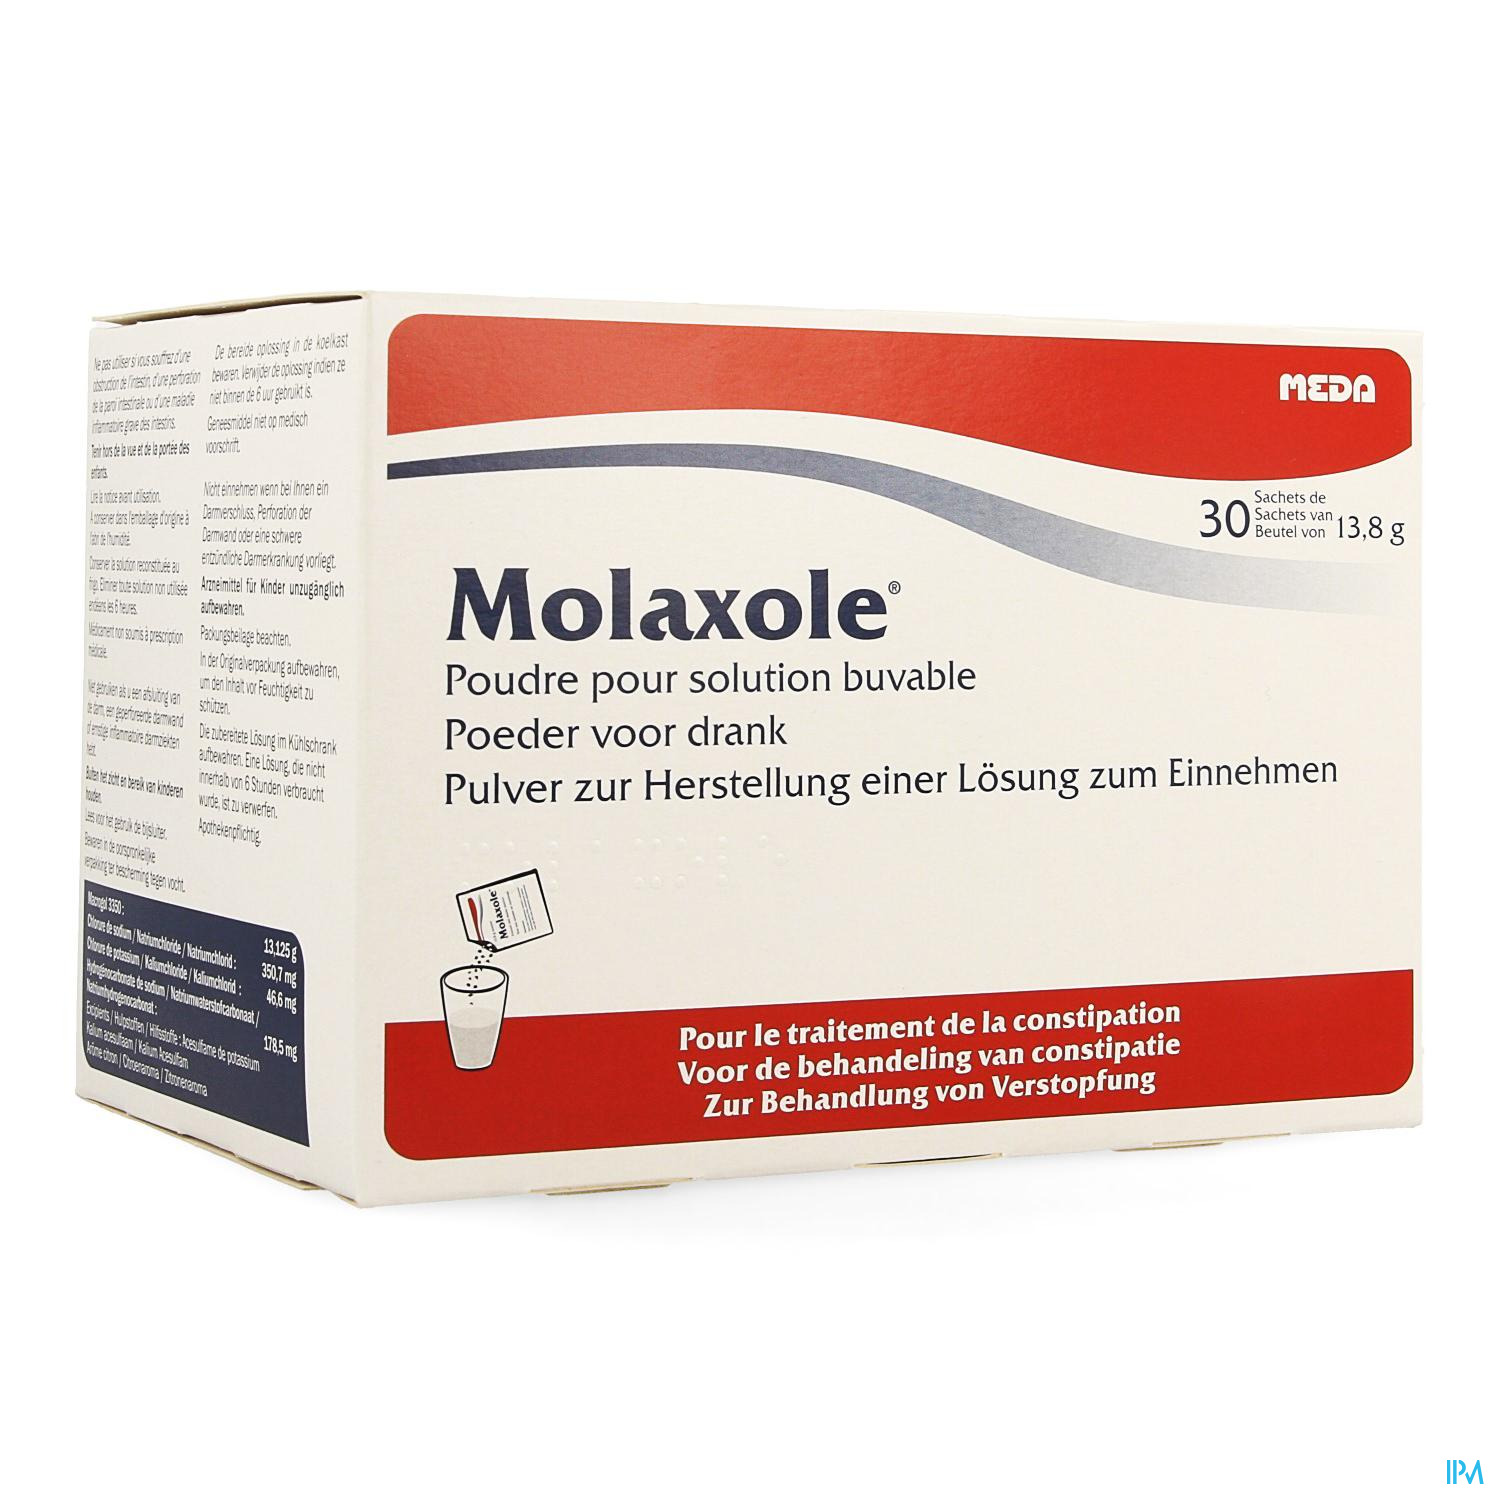 Molaxole Powder: A Comprehensive Review for Health Enthusiasts